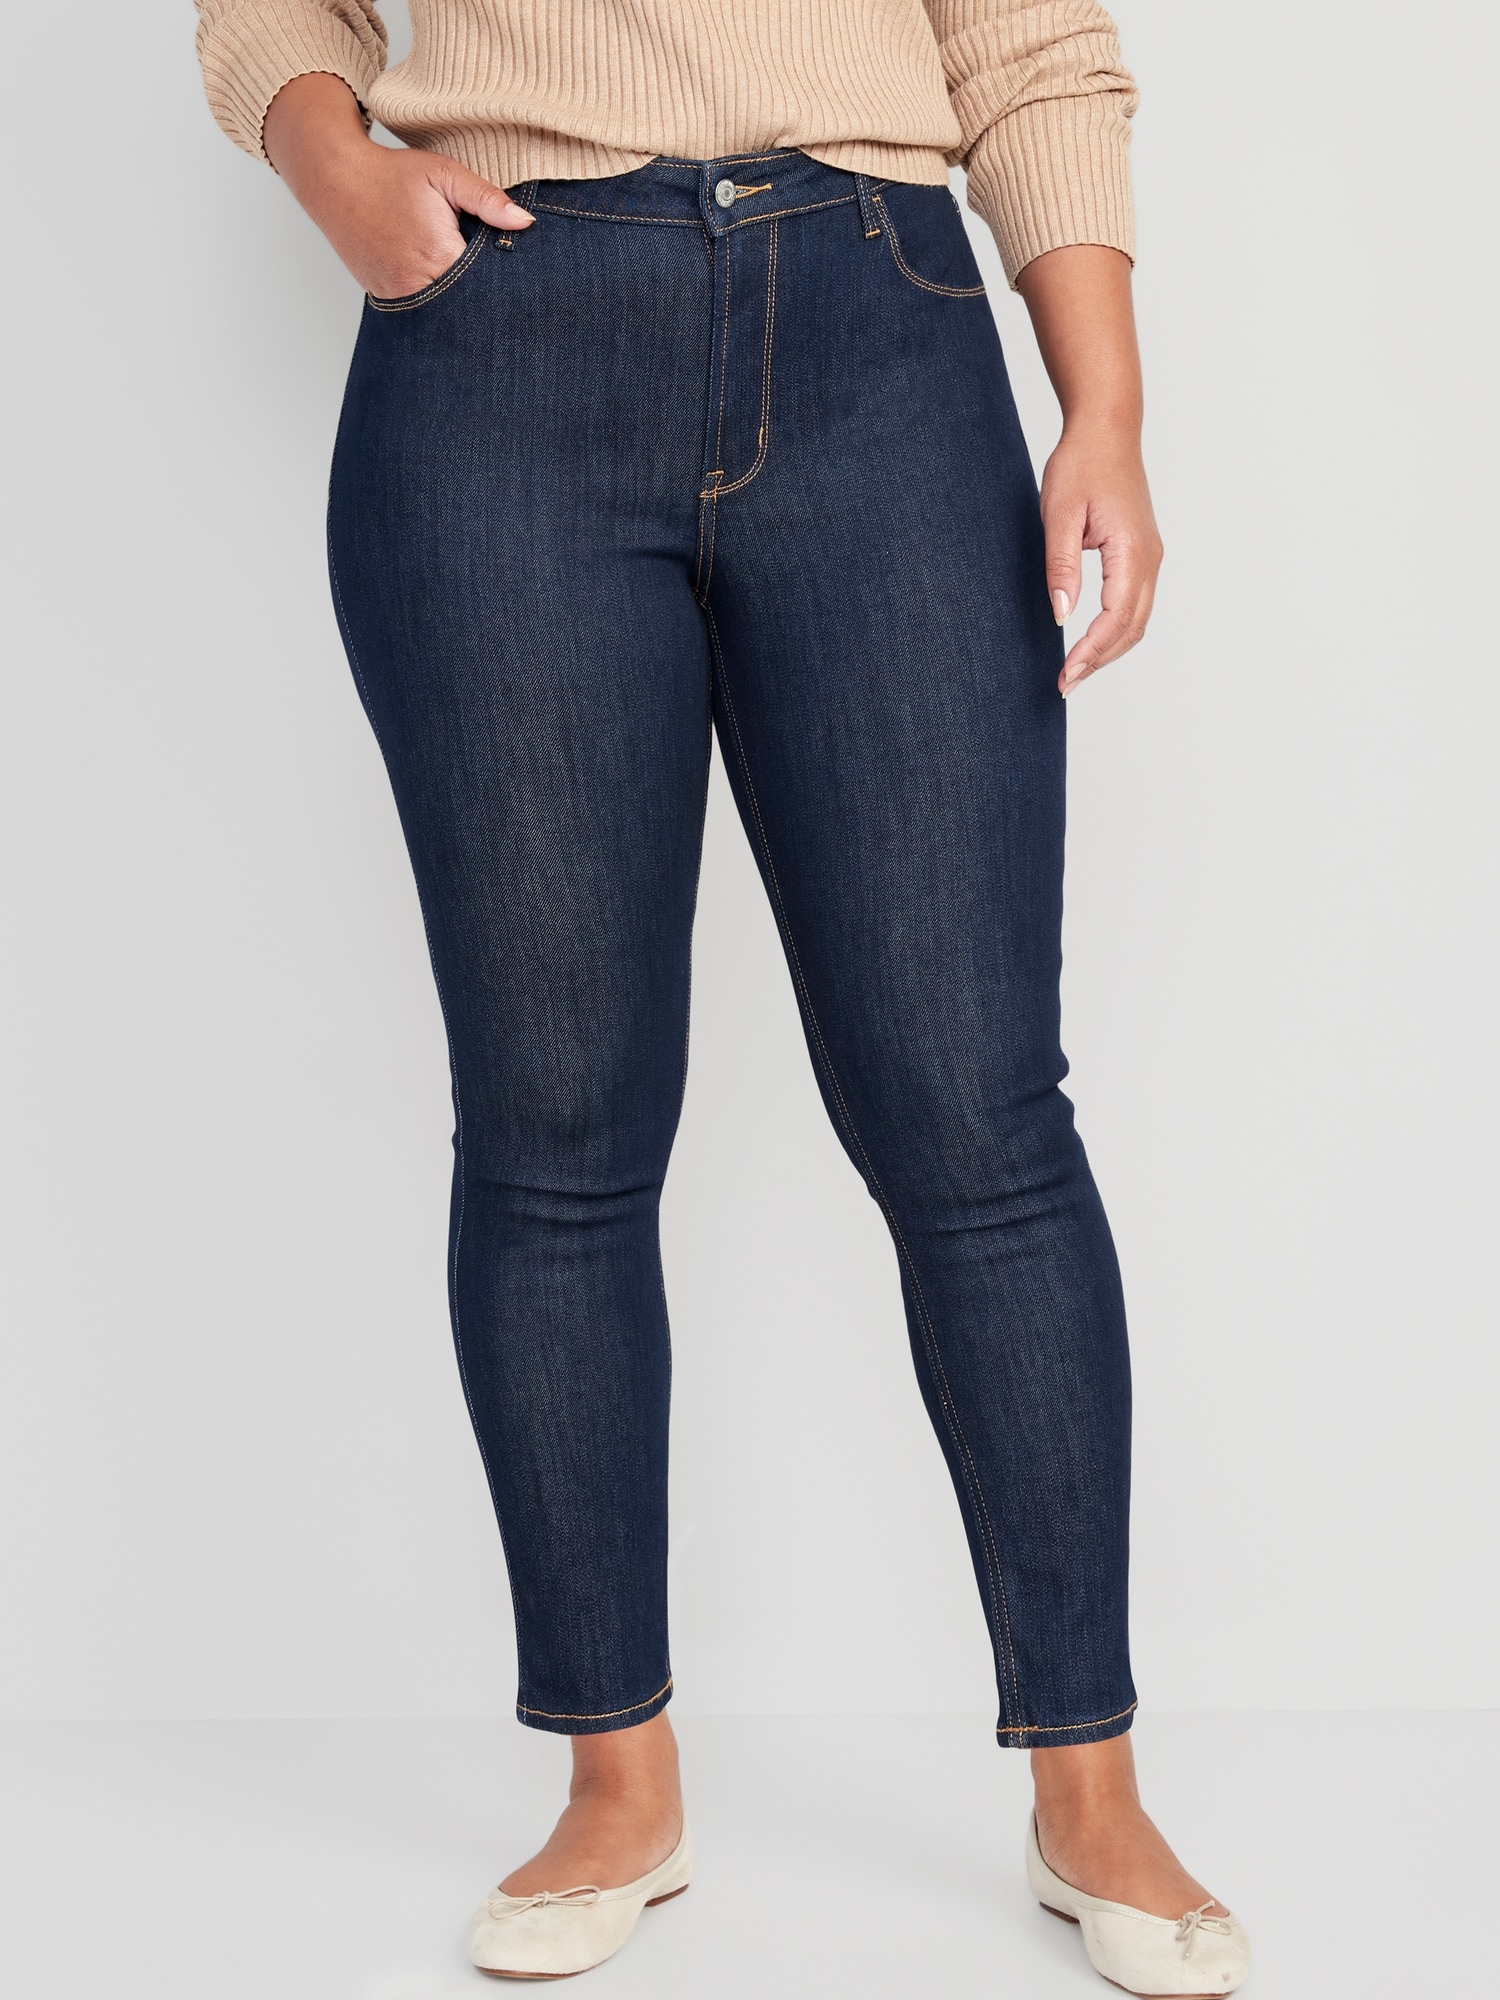 High Waisted Wow Super Skinny Ankle Jeans For Women Old Navy